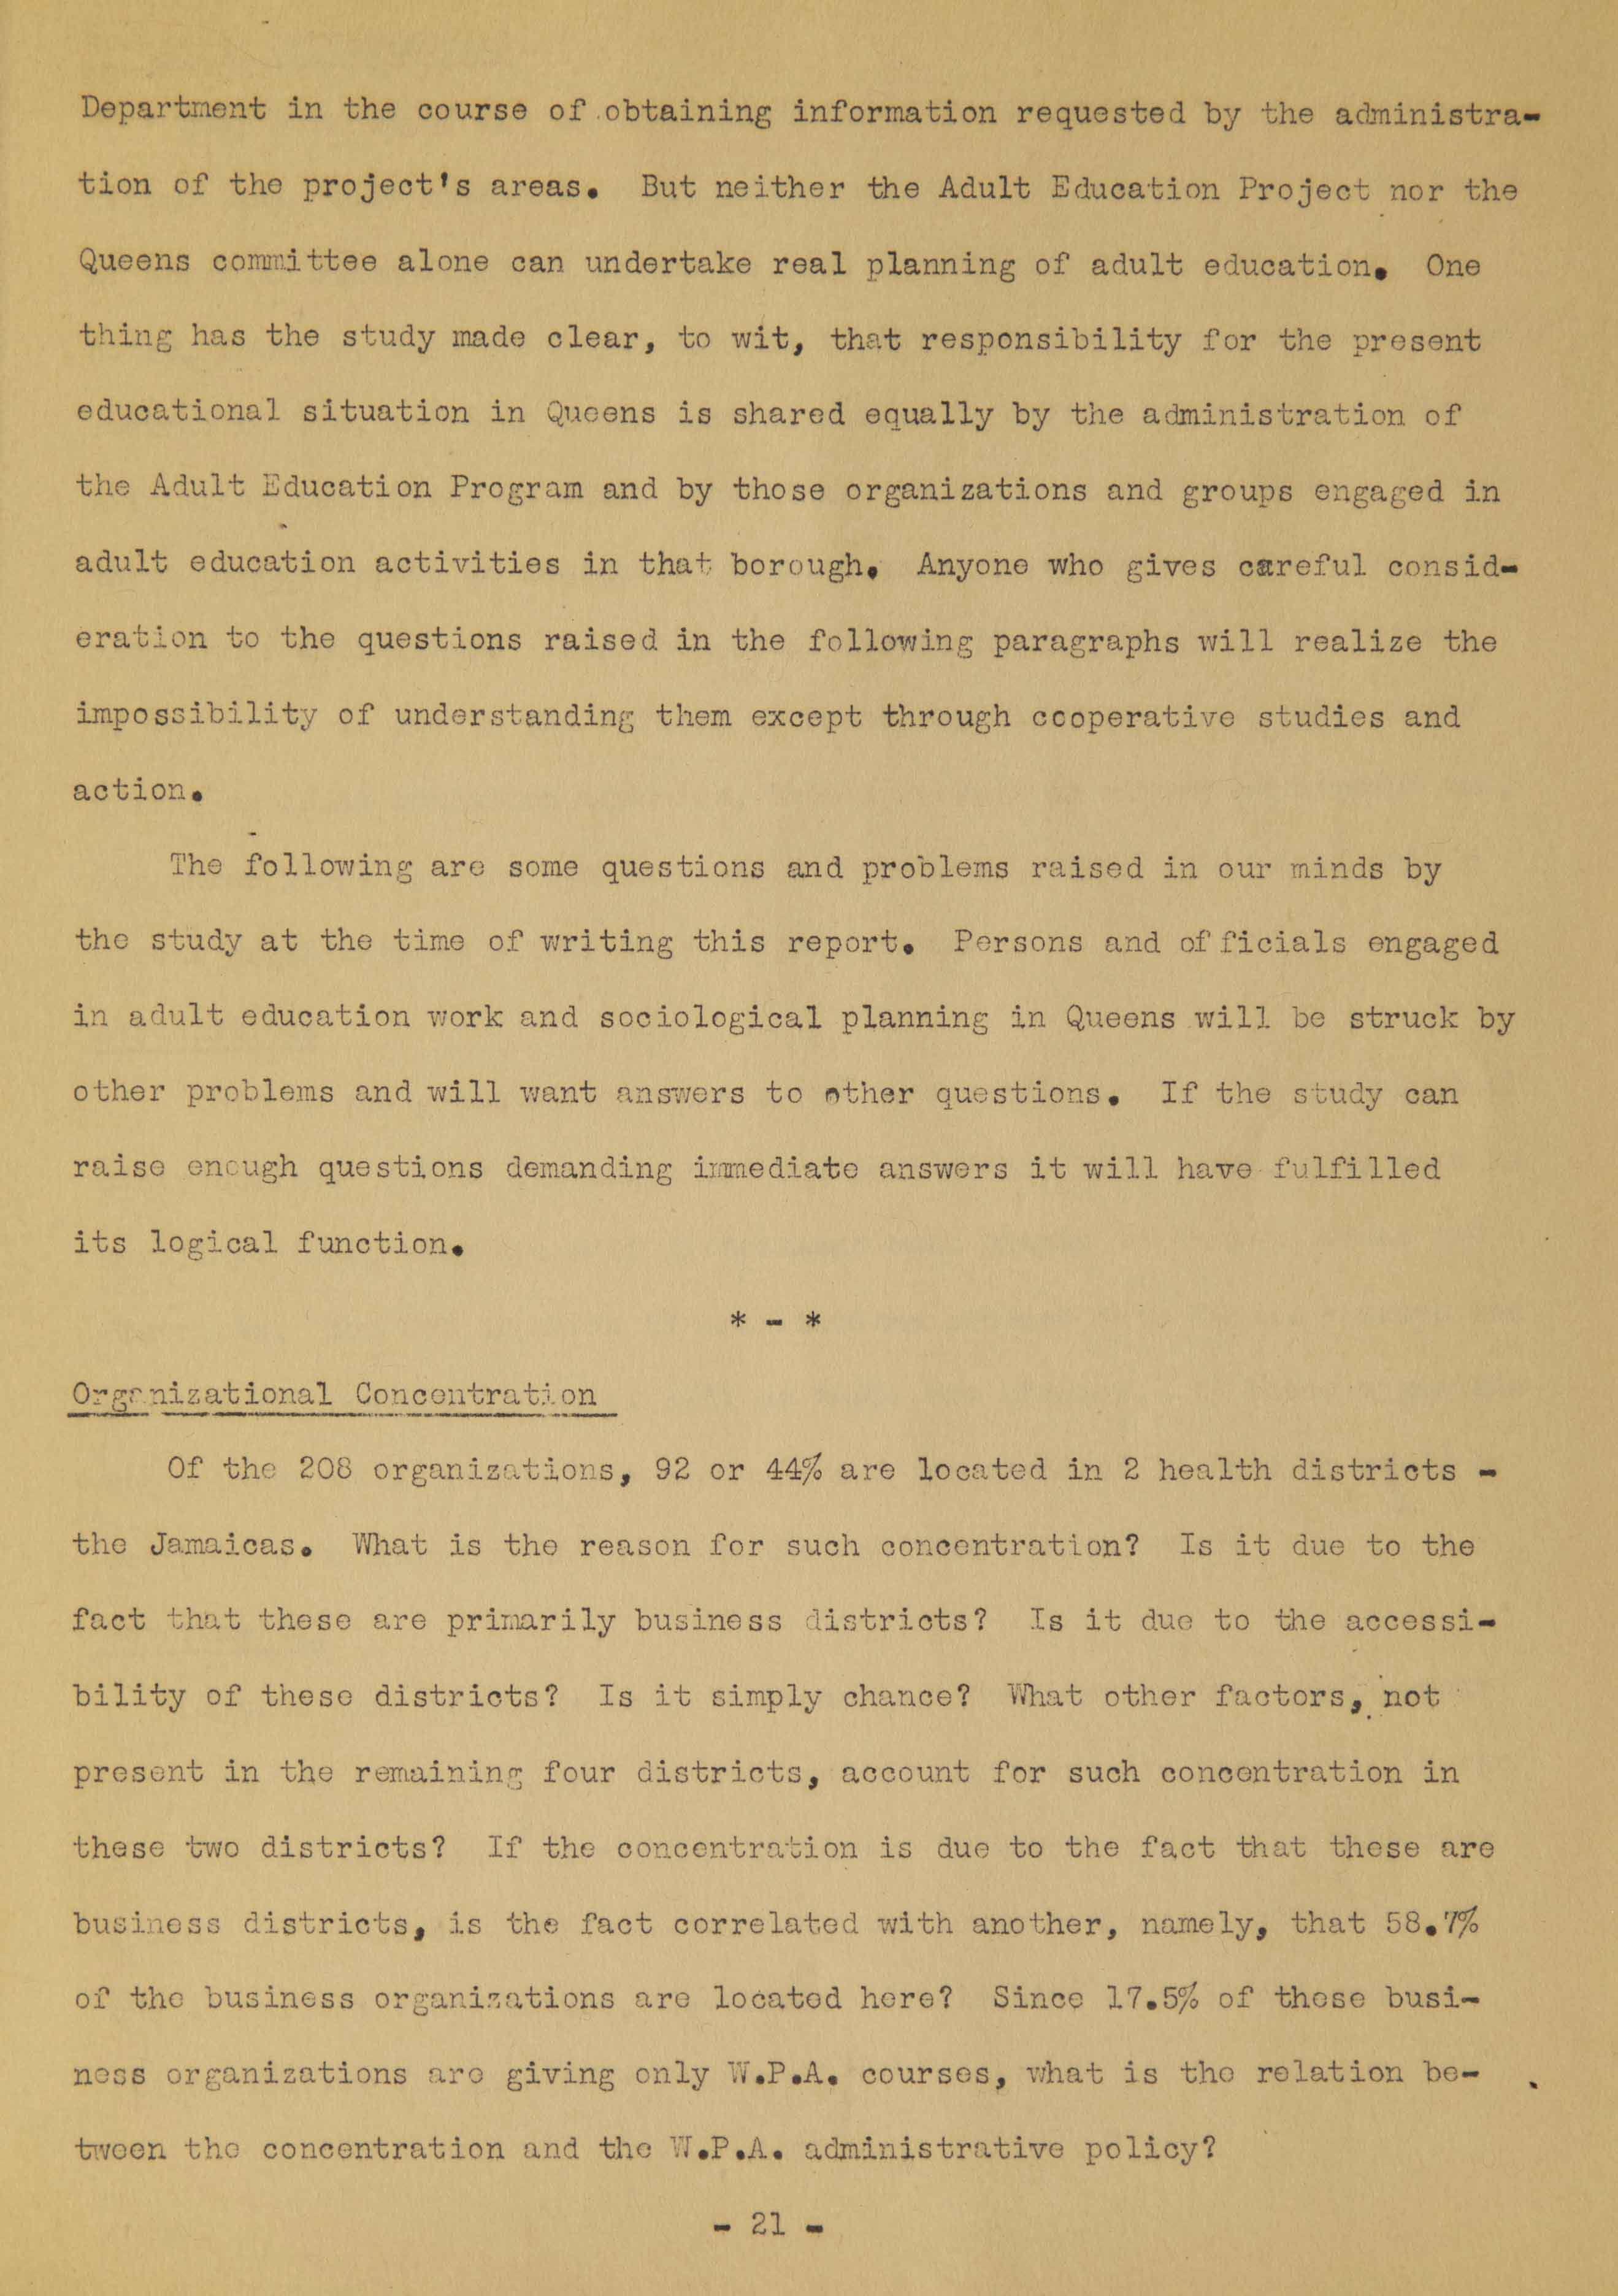 Another image of a page outlining conclusion of the study